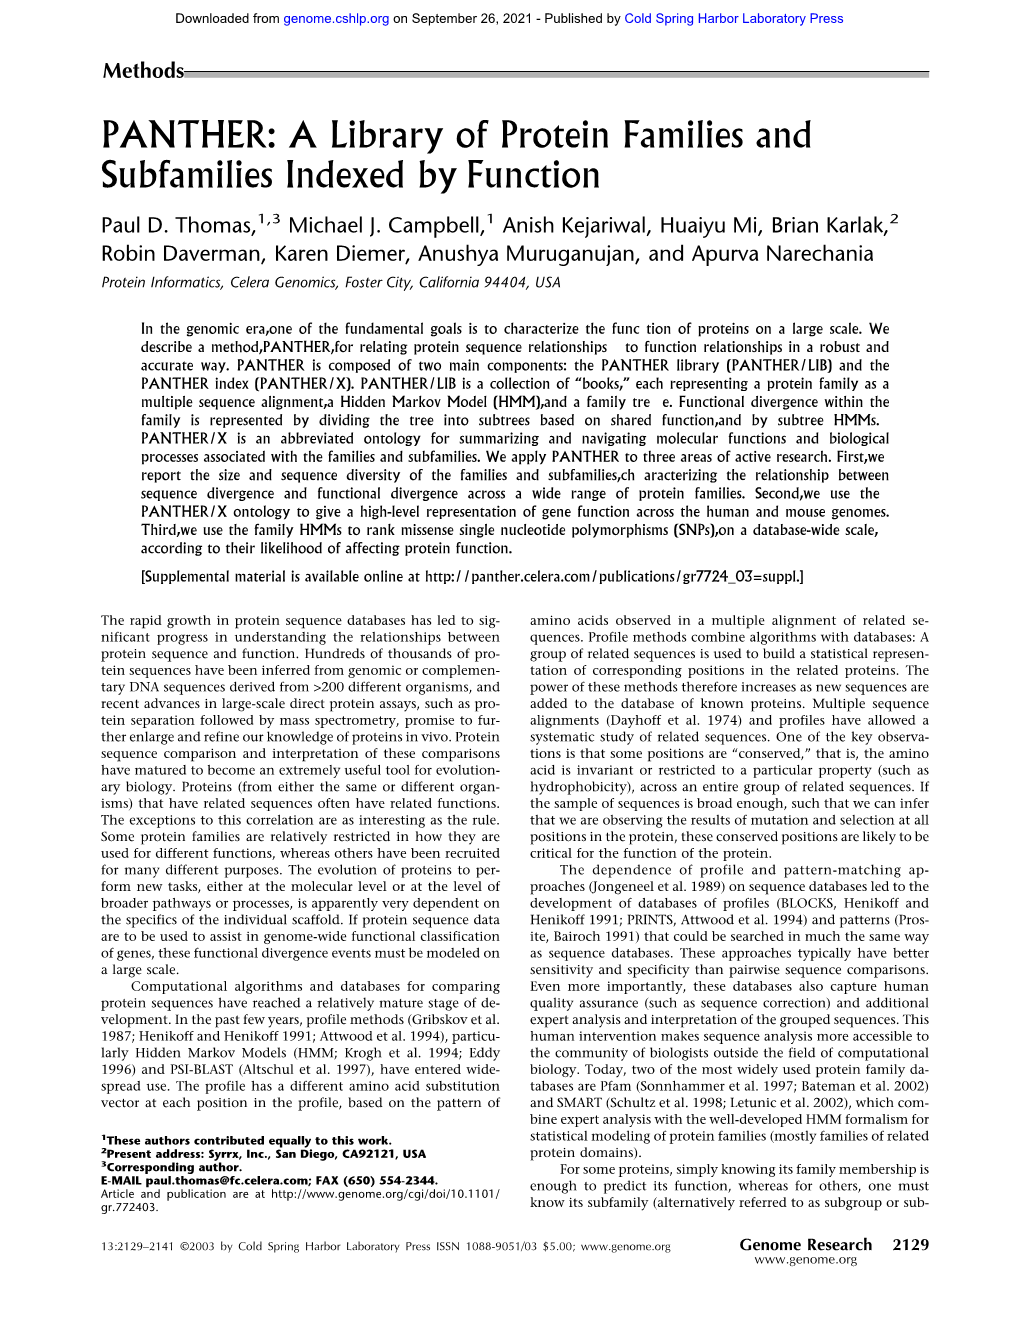 A Library of Protein Families and Subfamilies Indexed by Function Paul D